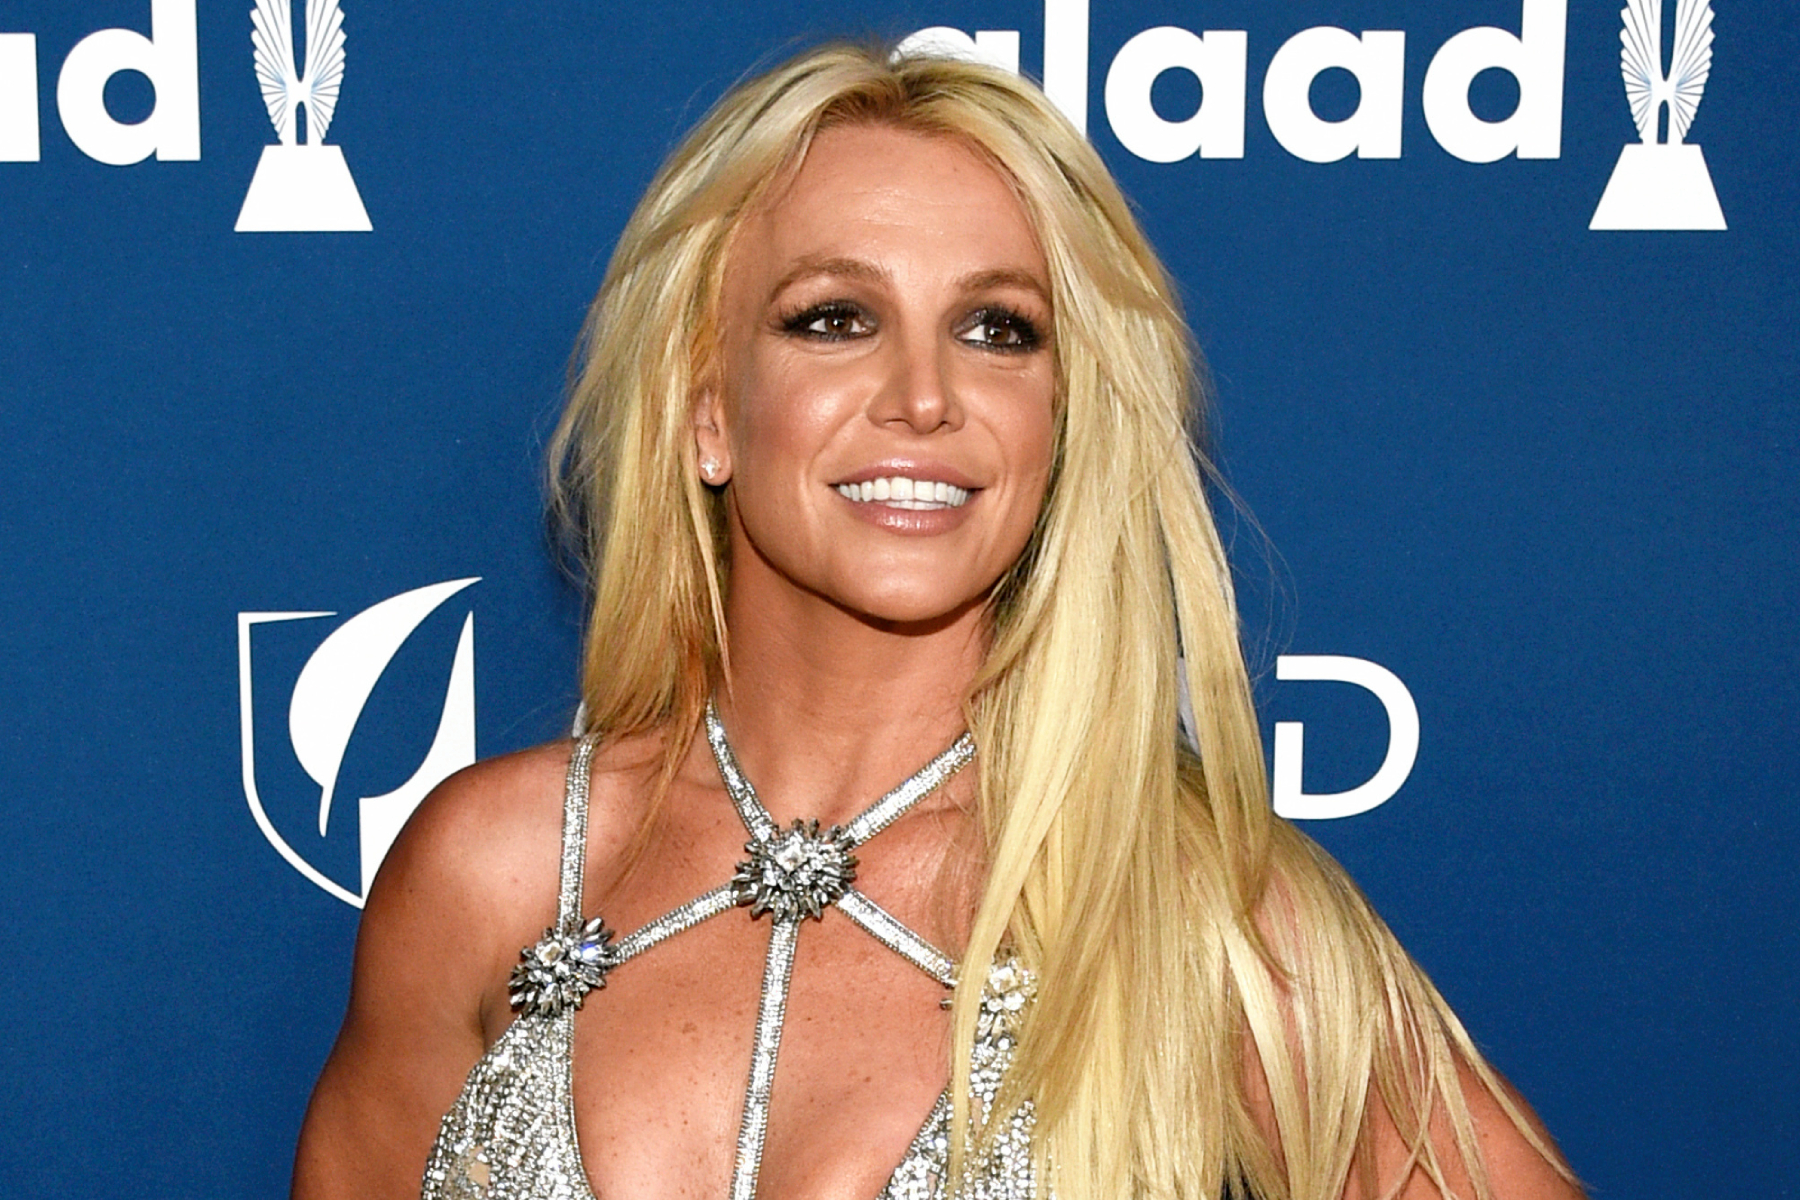 Britney Spears Threatens to Sue Ex-Managers Tri Star: 'They Were Trying to Kill Me'